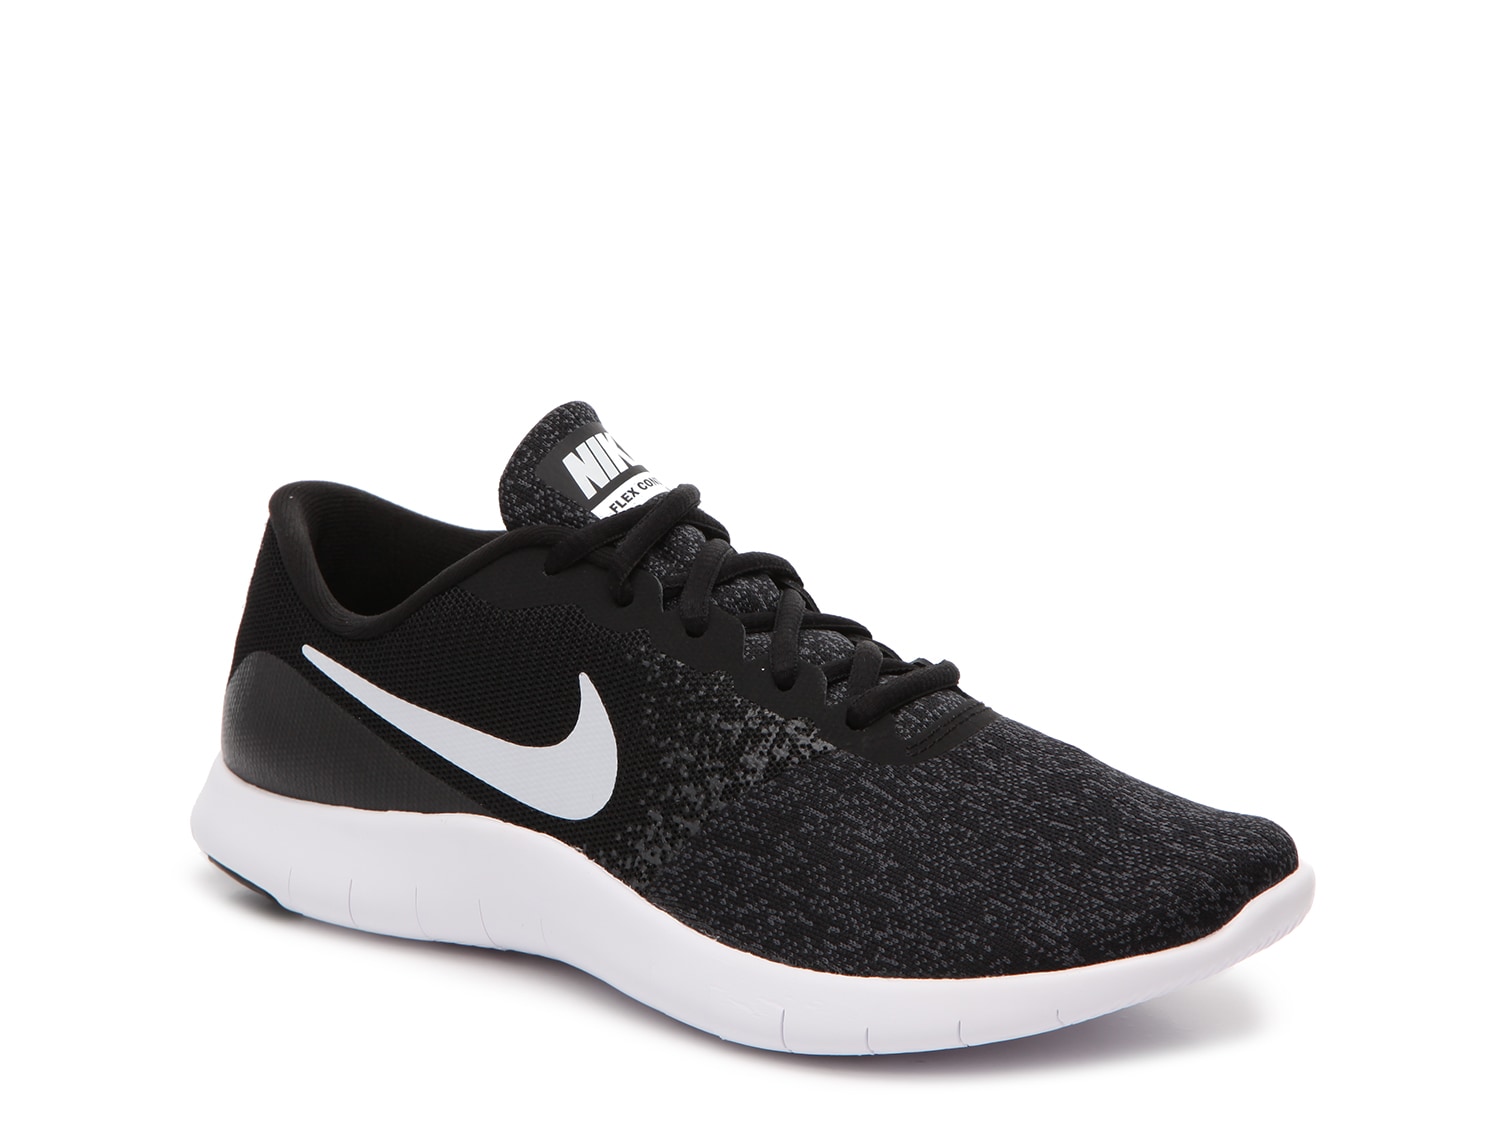 nike flex contact 2 trainers ladies